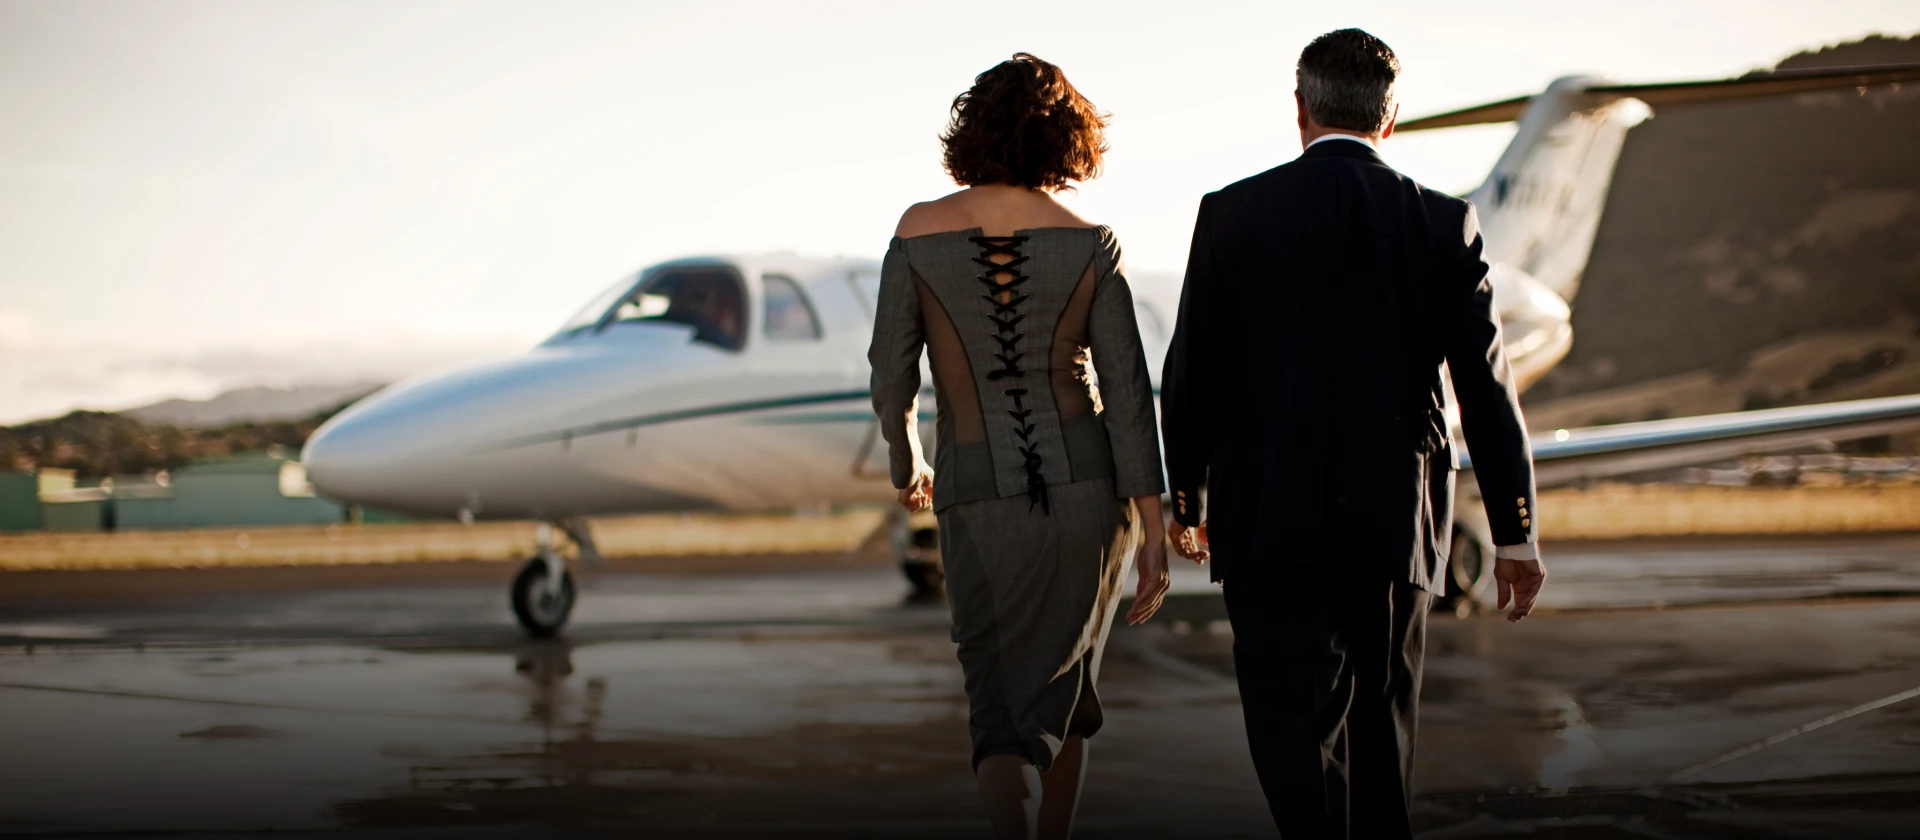 Transform your travels with Ocean Jets unrivaled Private Jet charter experiences in California, USA